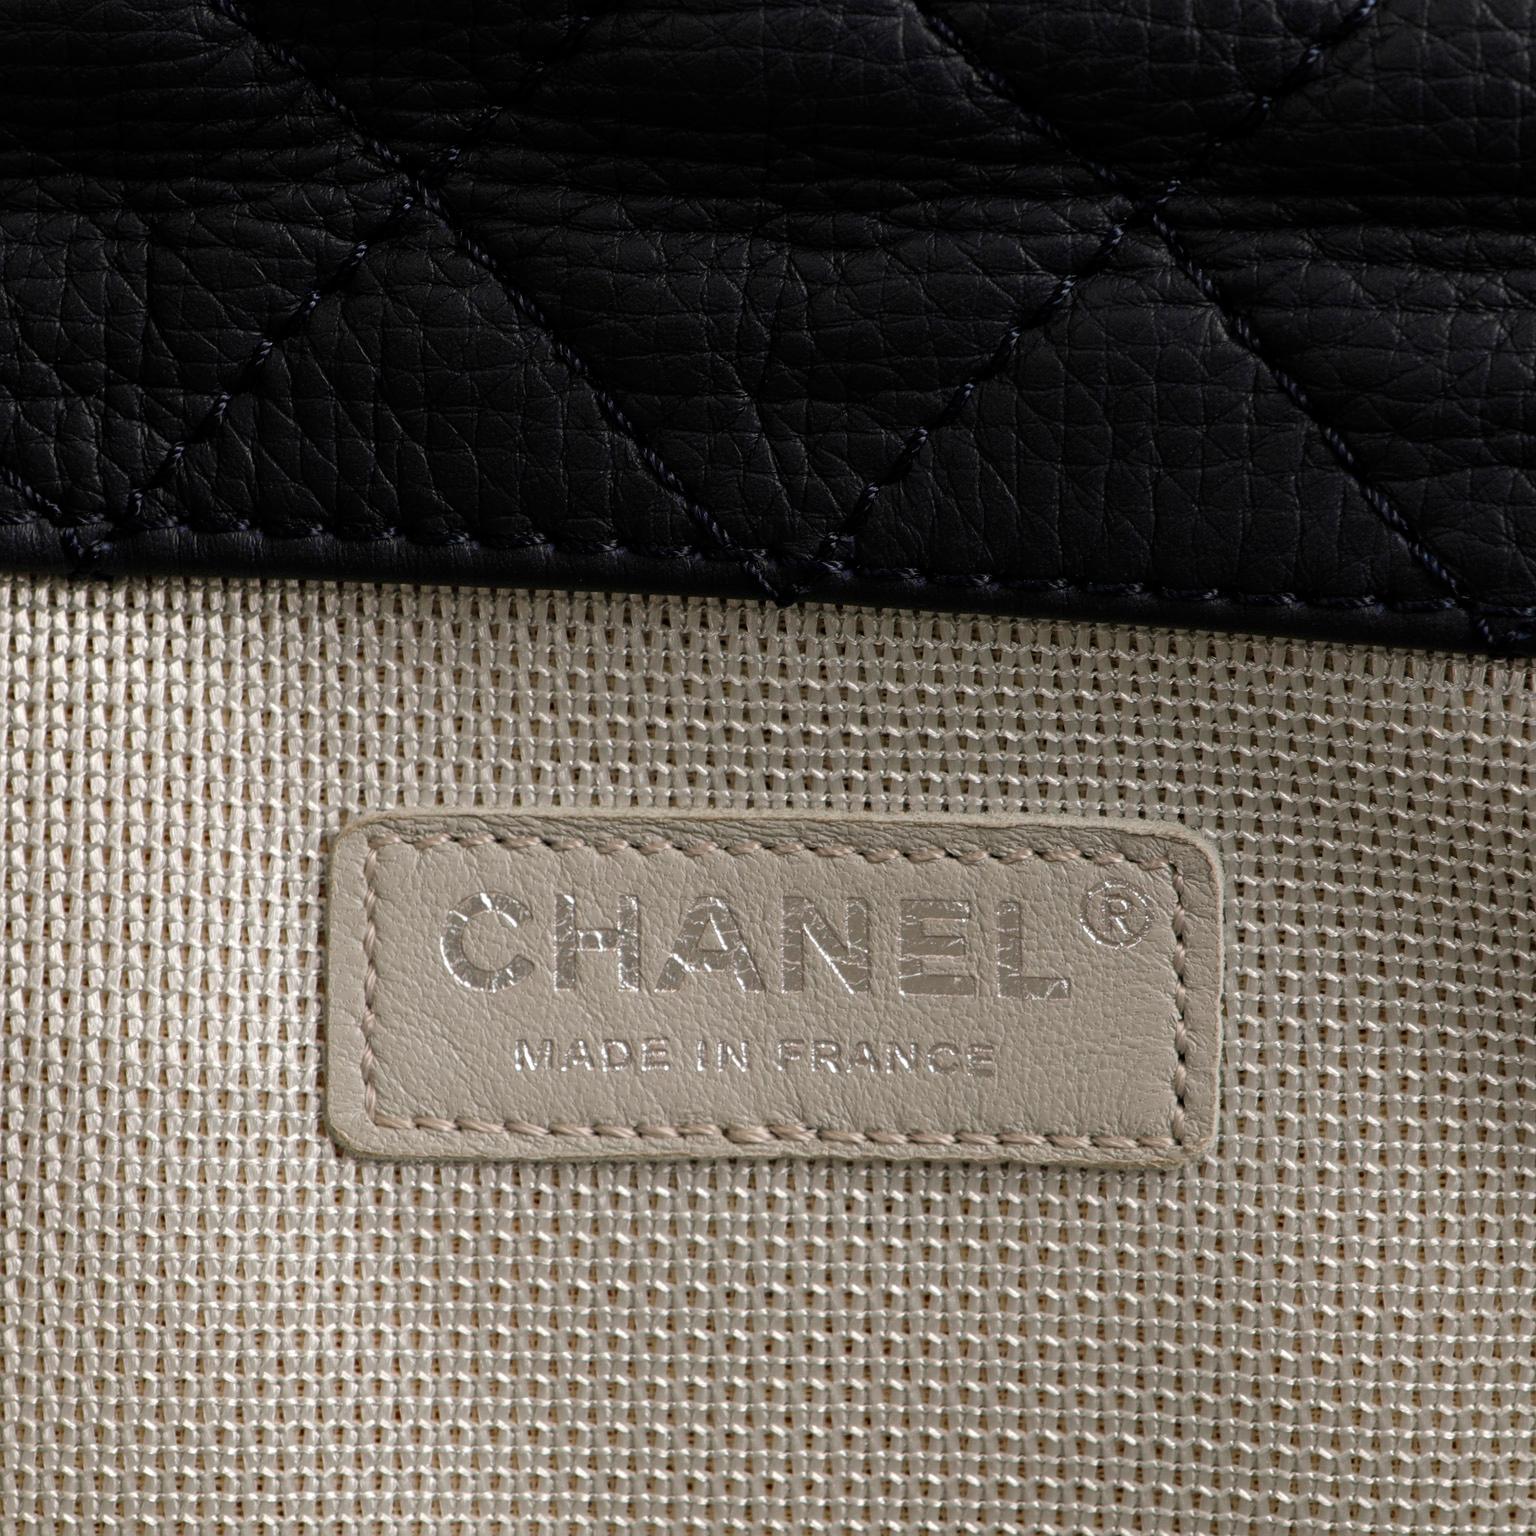 Chanel Navy XXL Classic Travel Flap Bag In Excellent Condition For Sale In Palm Beach, FL